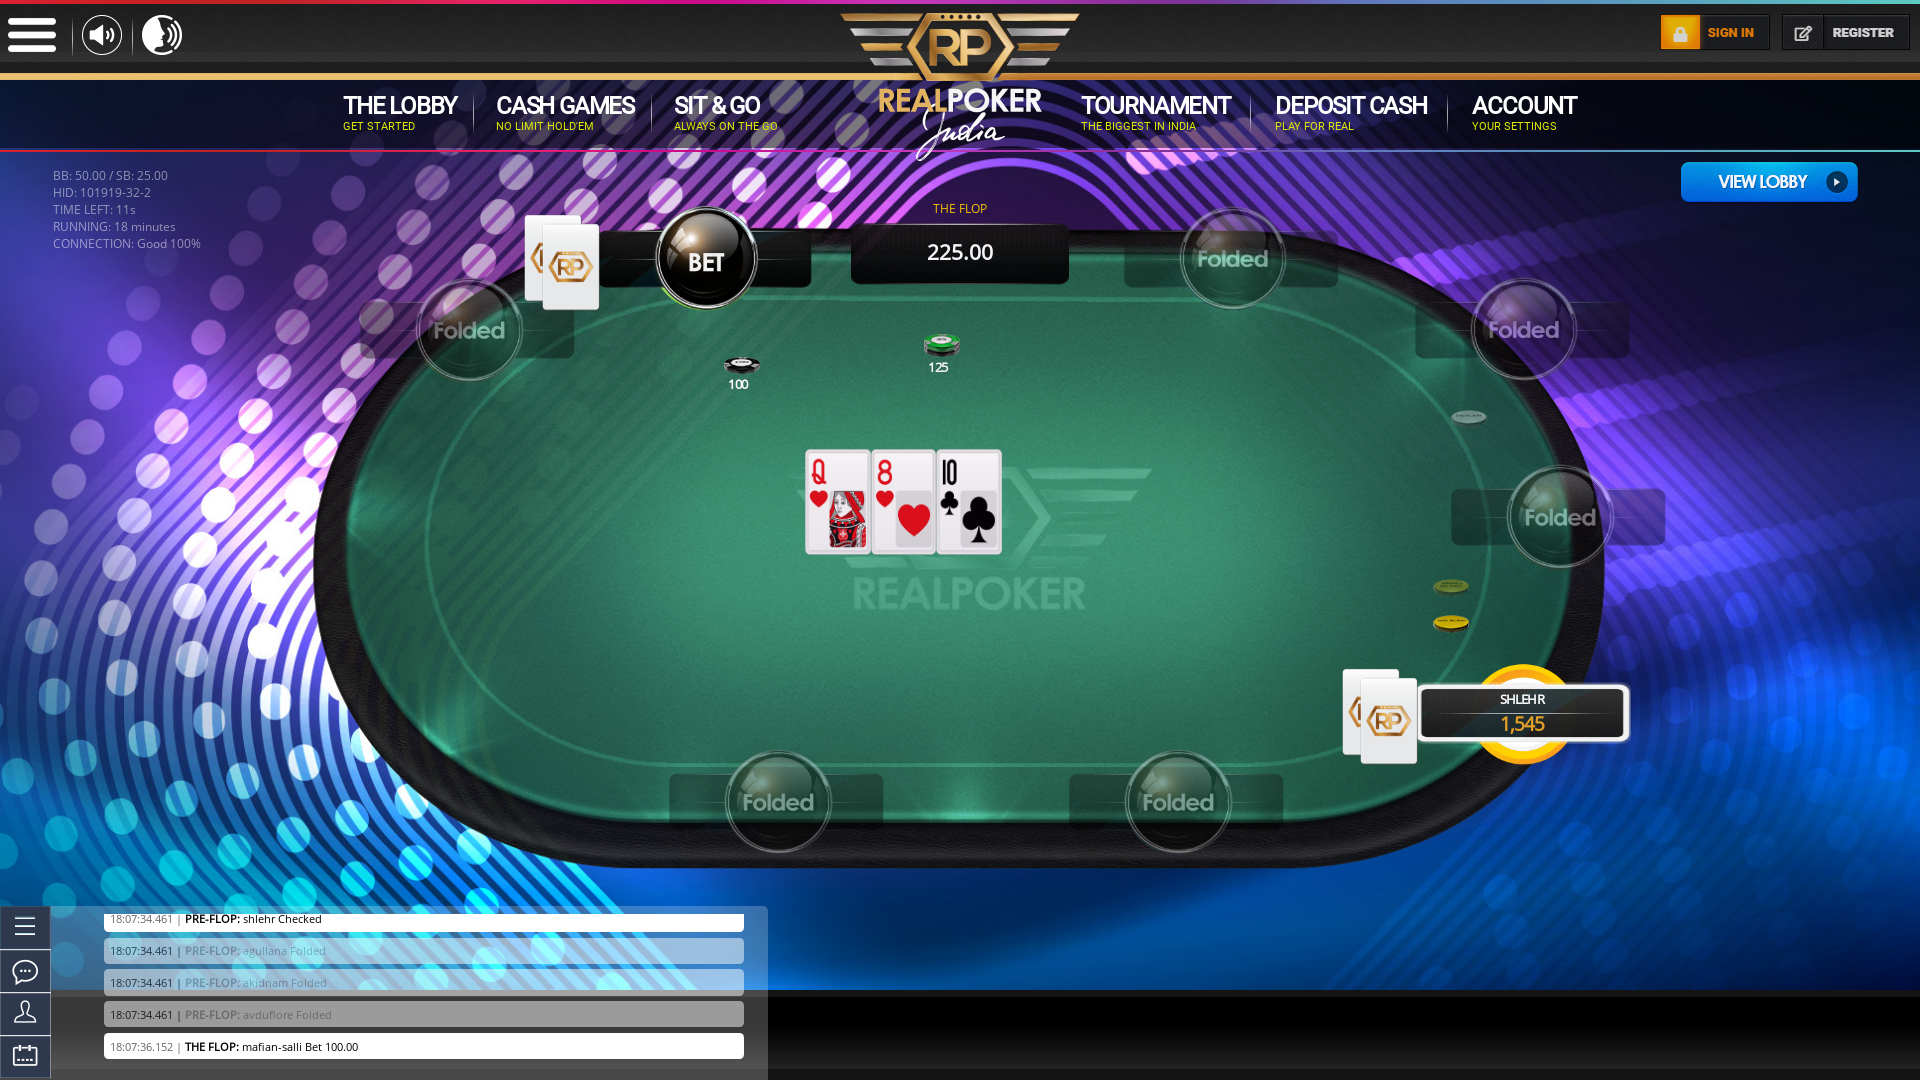 Mangalore texas holdem poker table on a 10 player table in the 18th minute of the game